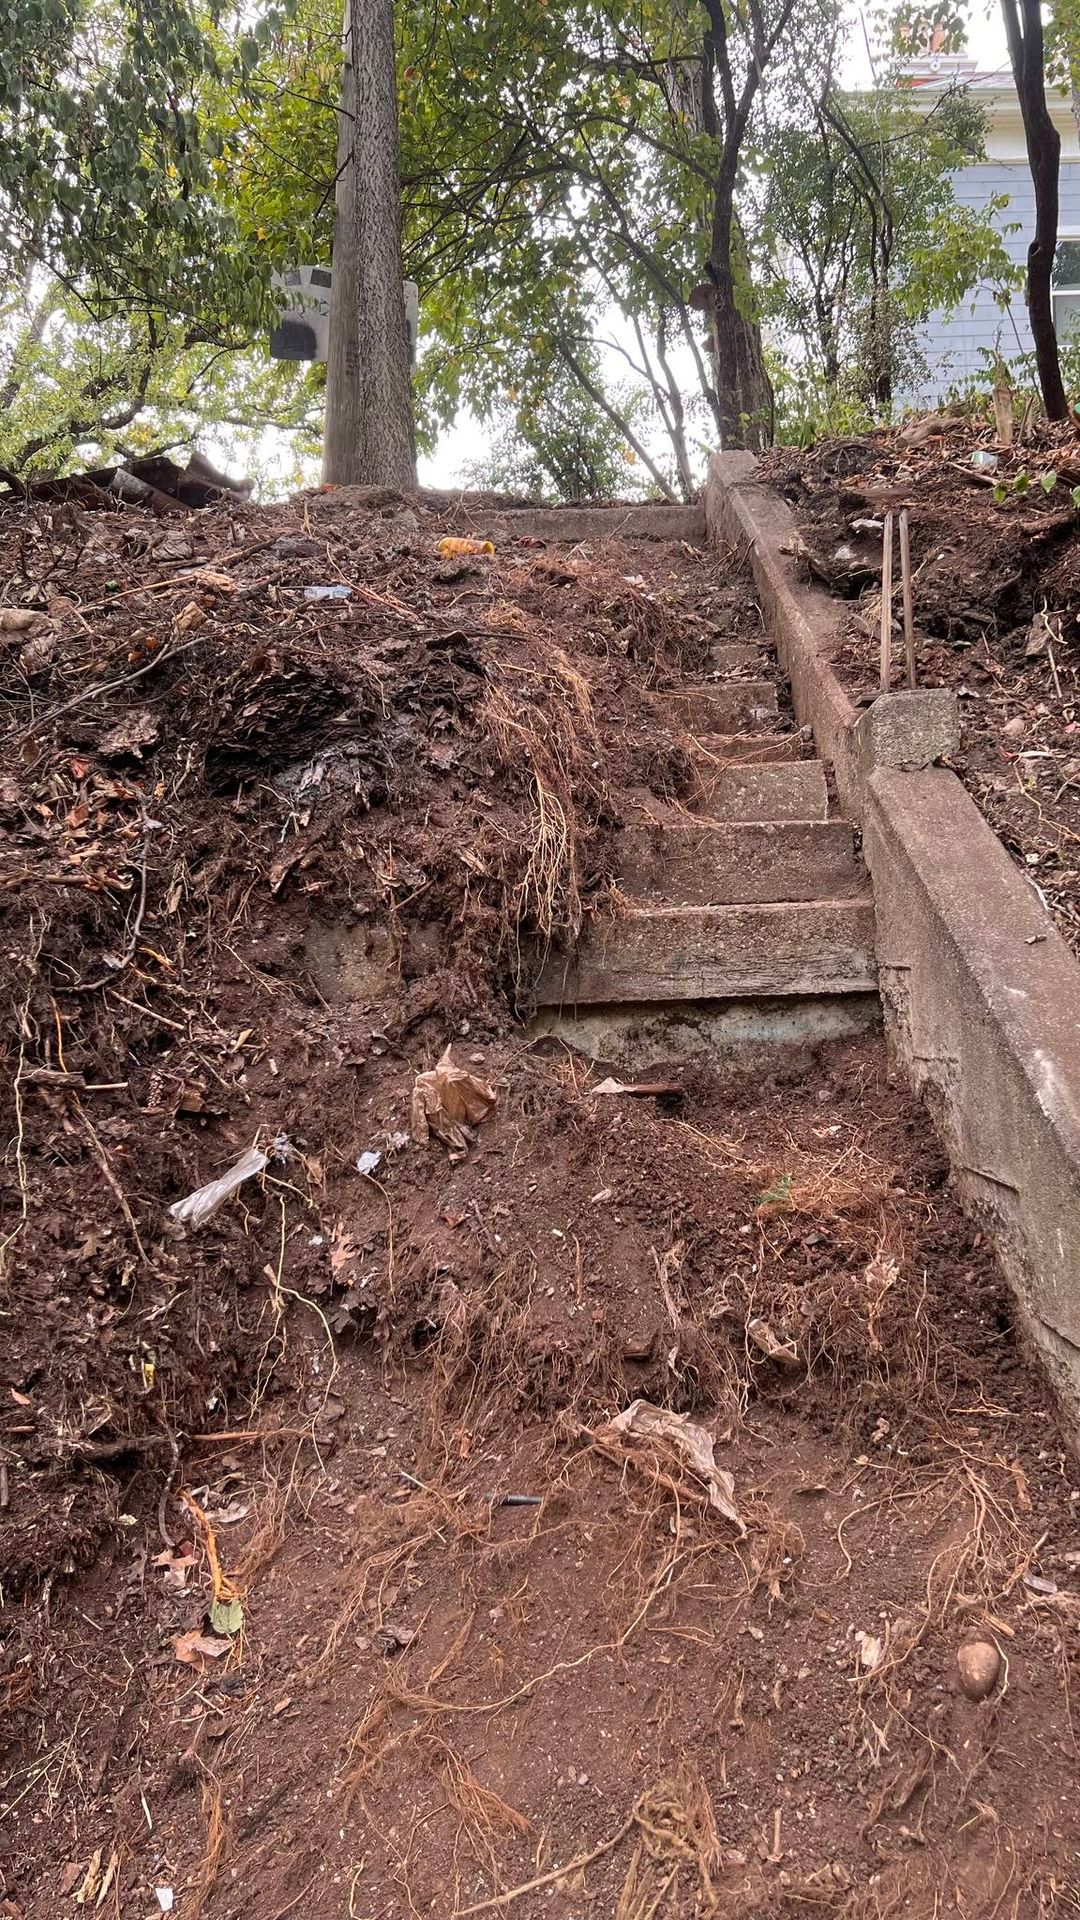 CLEANUP at Polk Street Steps: a future walking reconnection!